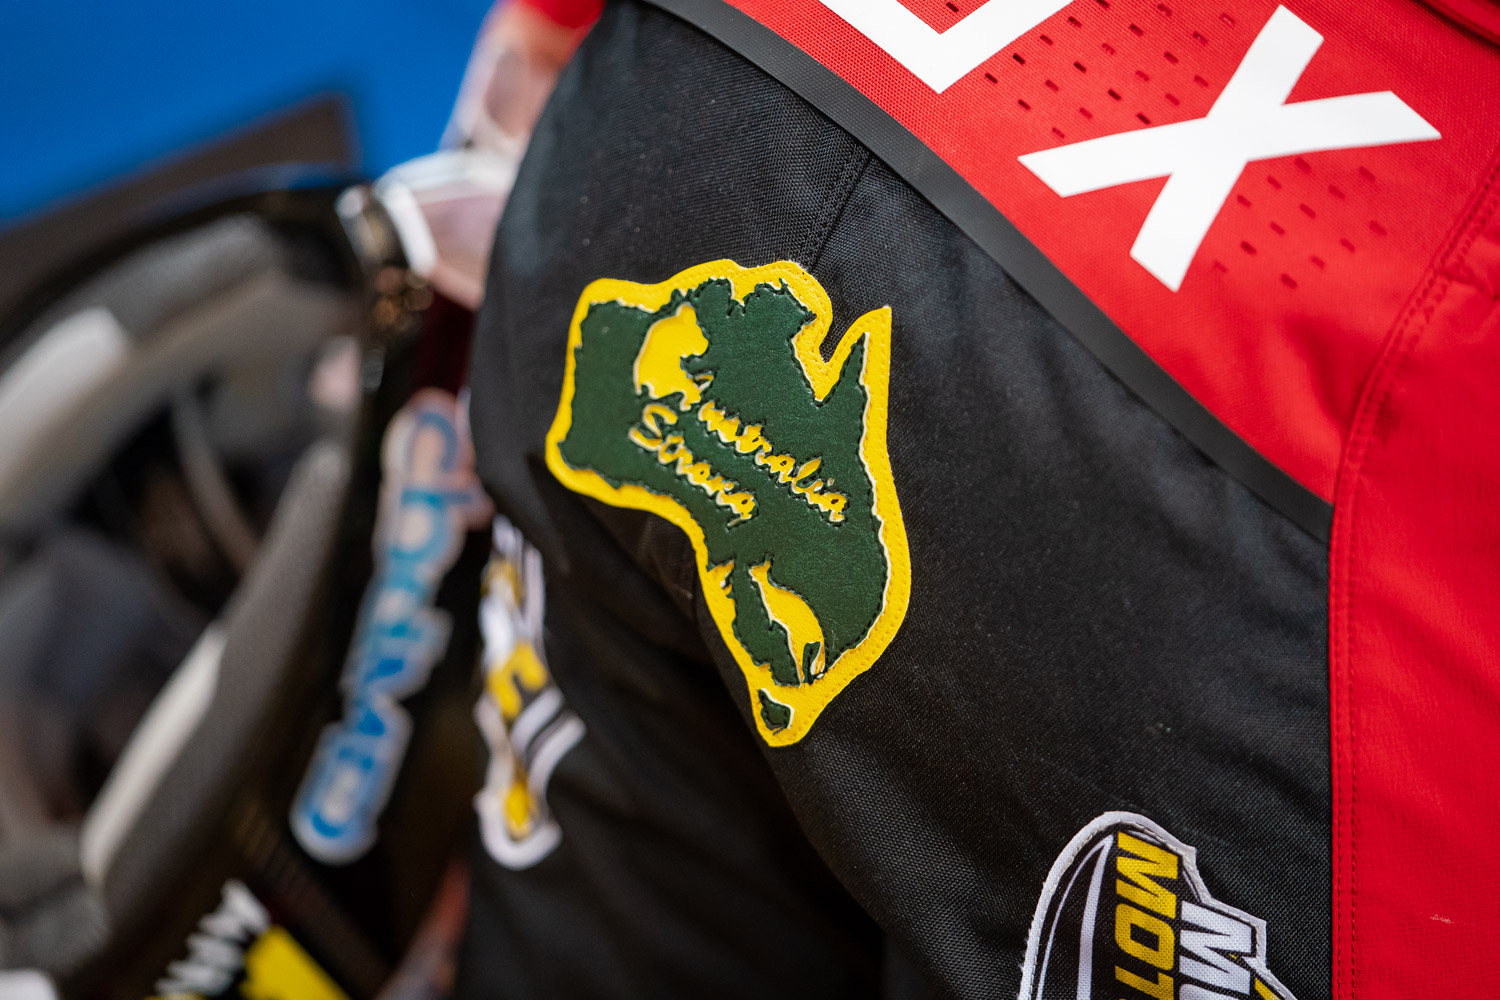 Chad Reed Gear Auction For Australian Fire Relief | Swapmoto Live